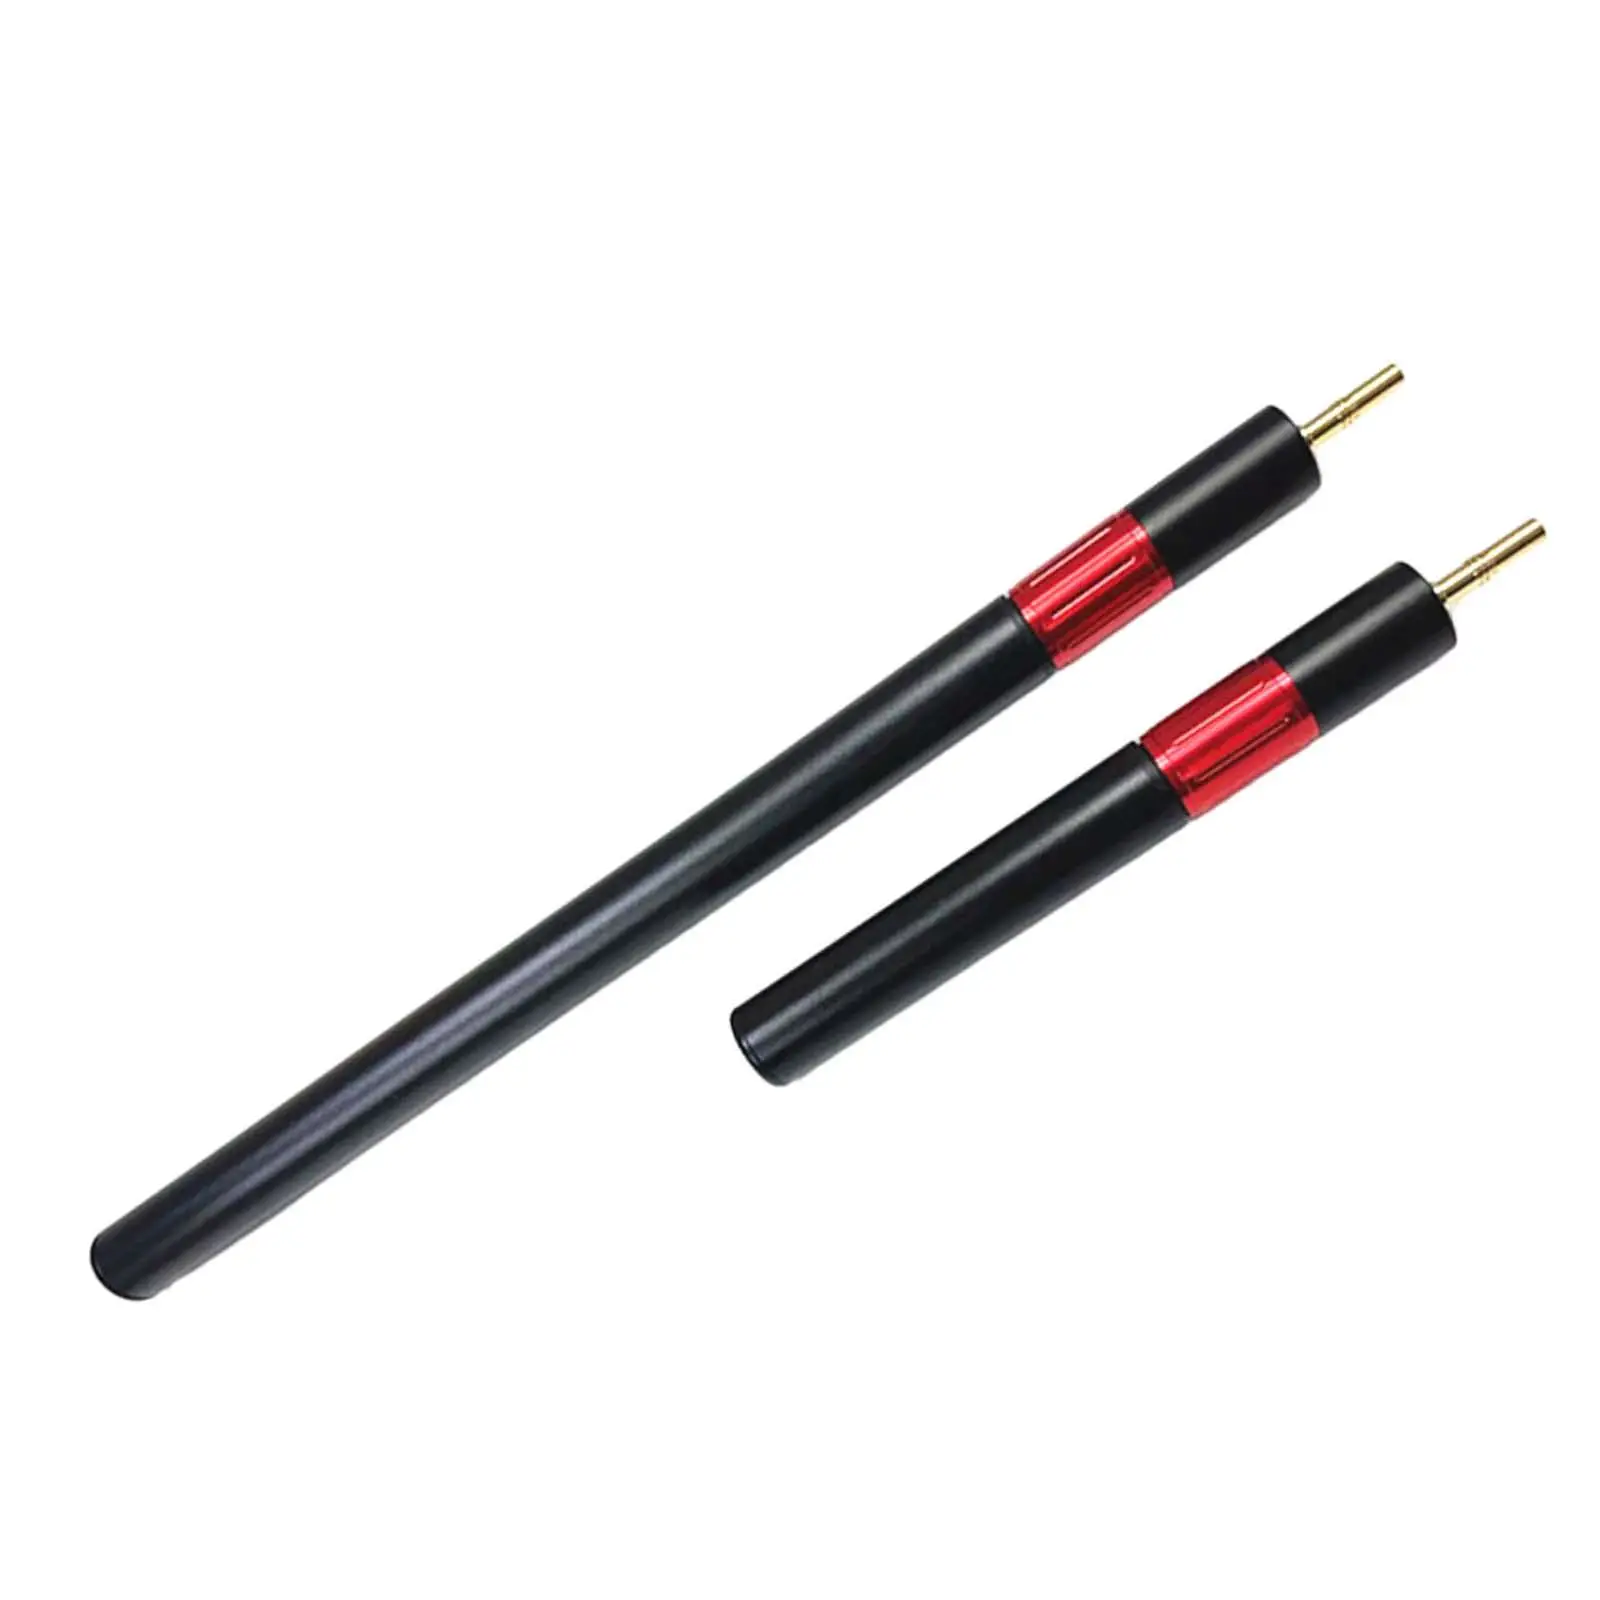 2 Pieces Billiards Cue Extension Attachment End Lengthener Pool Cue Extension for Game